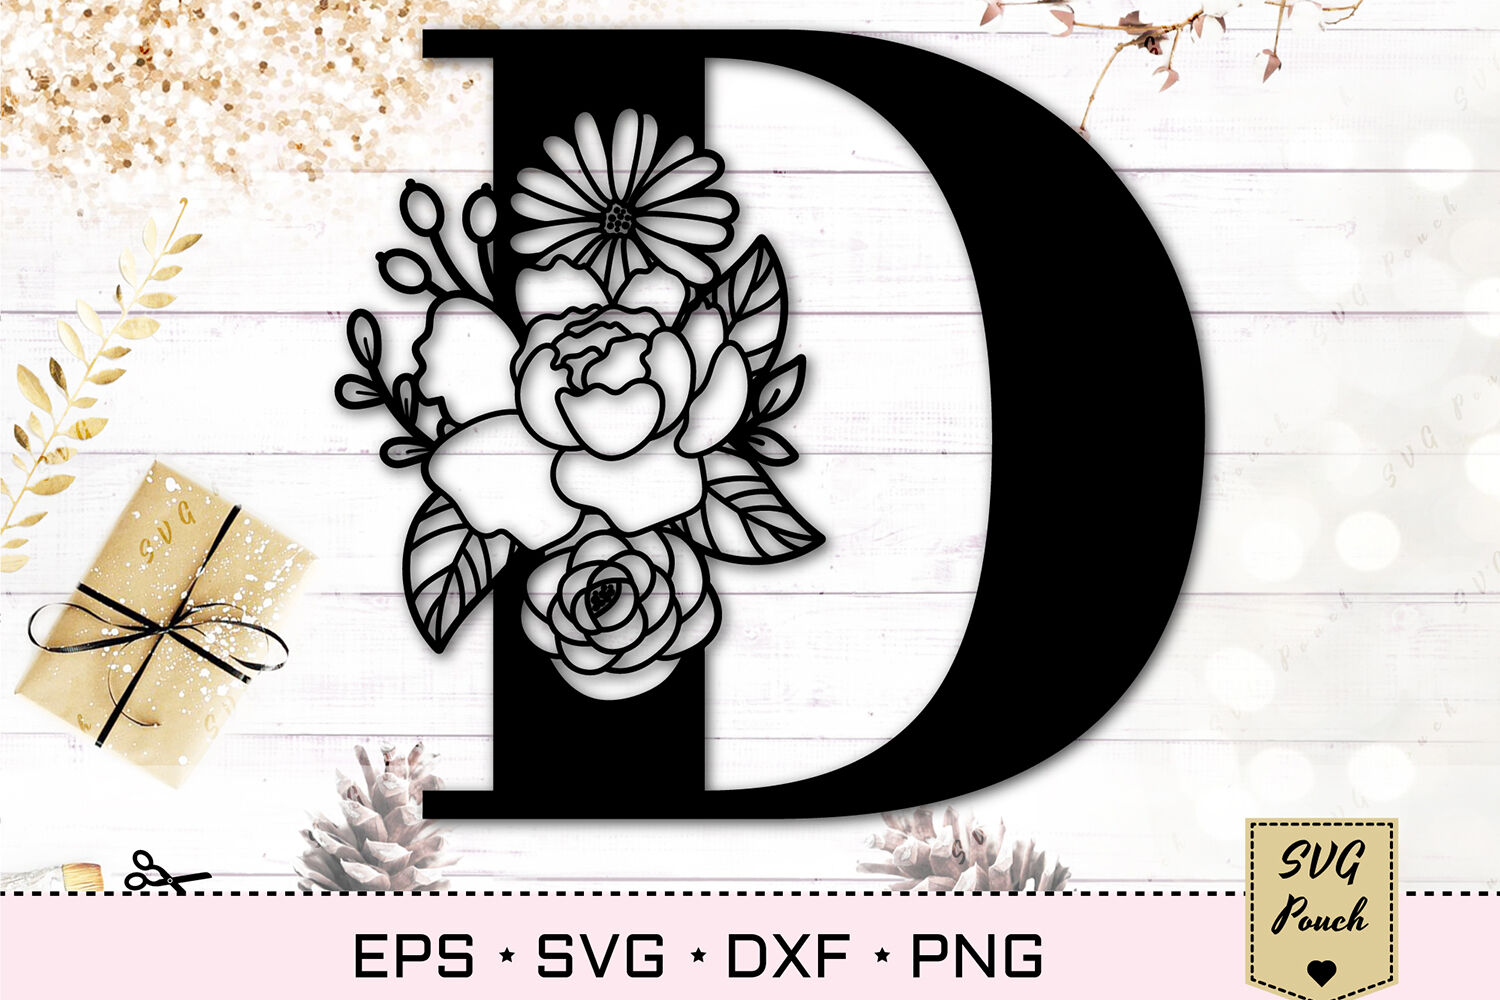 Full Alphabet Floral Monogram Font Initial Svg By Svgpouch Thehungryjpeg Com